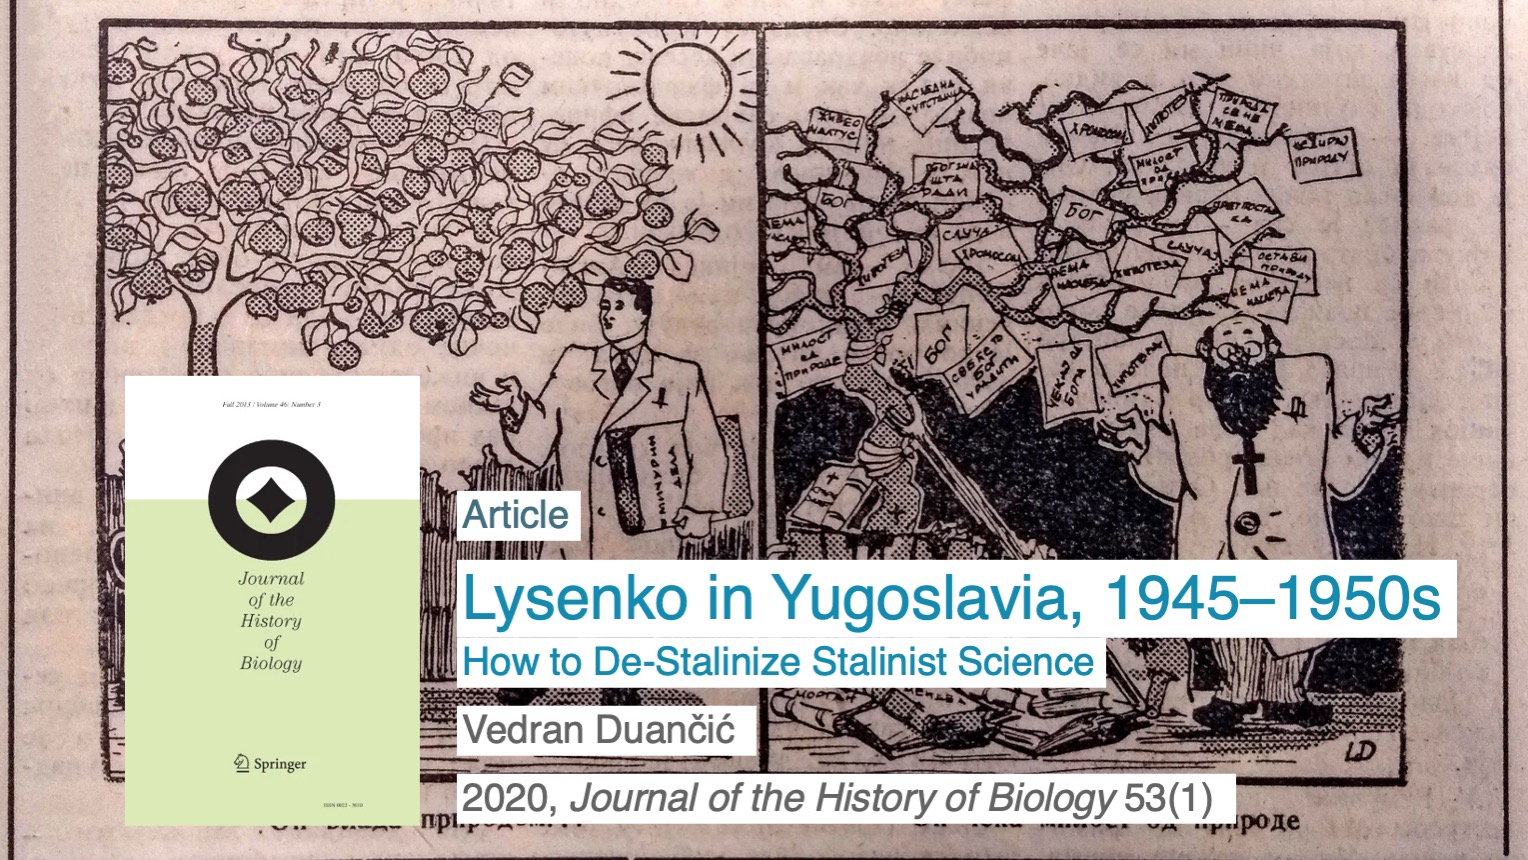 Vedran Duančić: Lysenko in Yugoslavia, 1945-1950s. How to De-Stalinize Stalinist Science. 2020, Journal of the History of Biology 53(1).